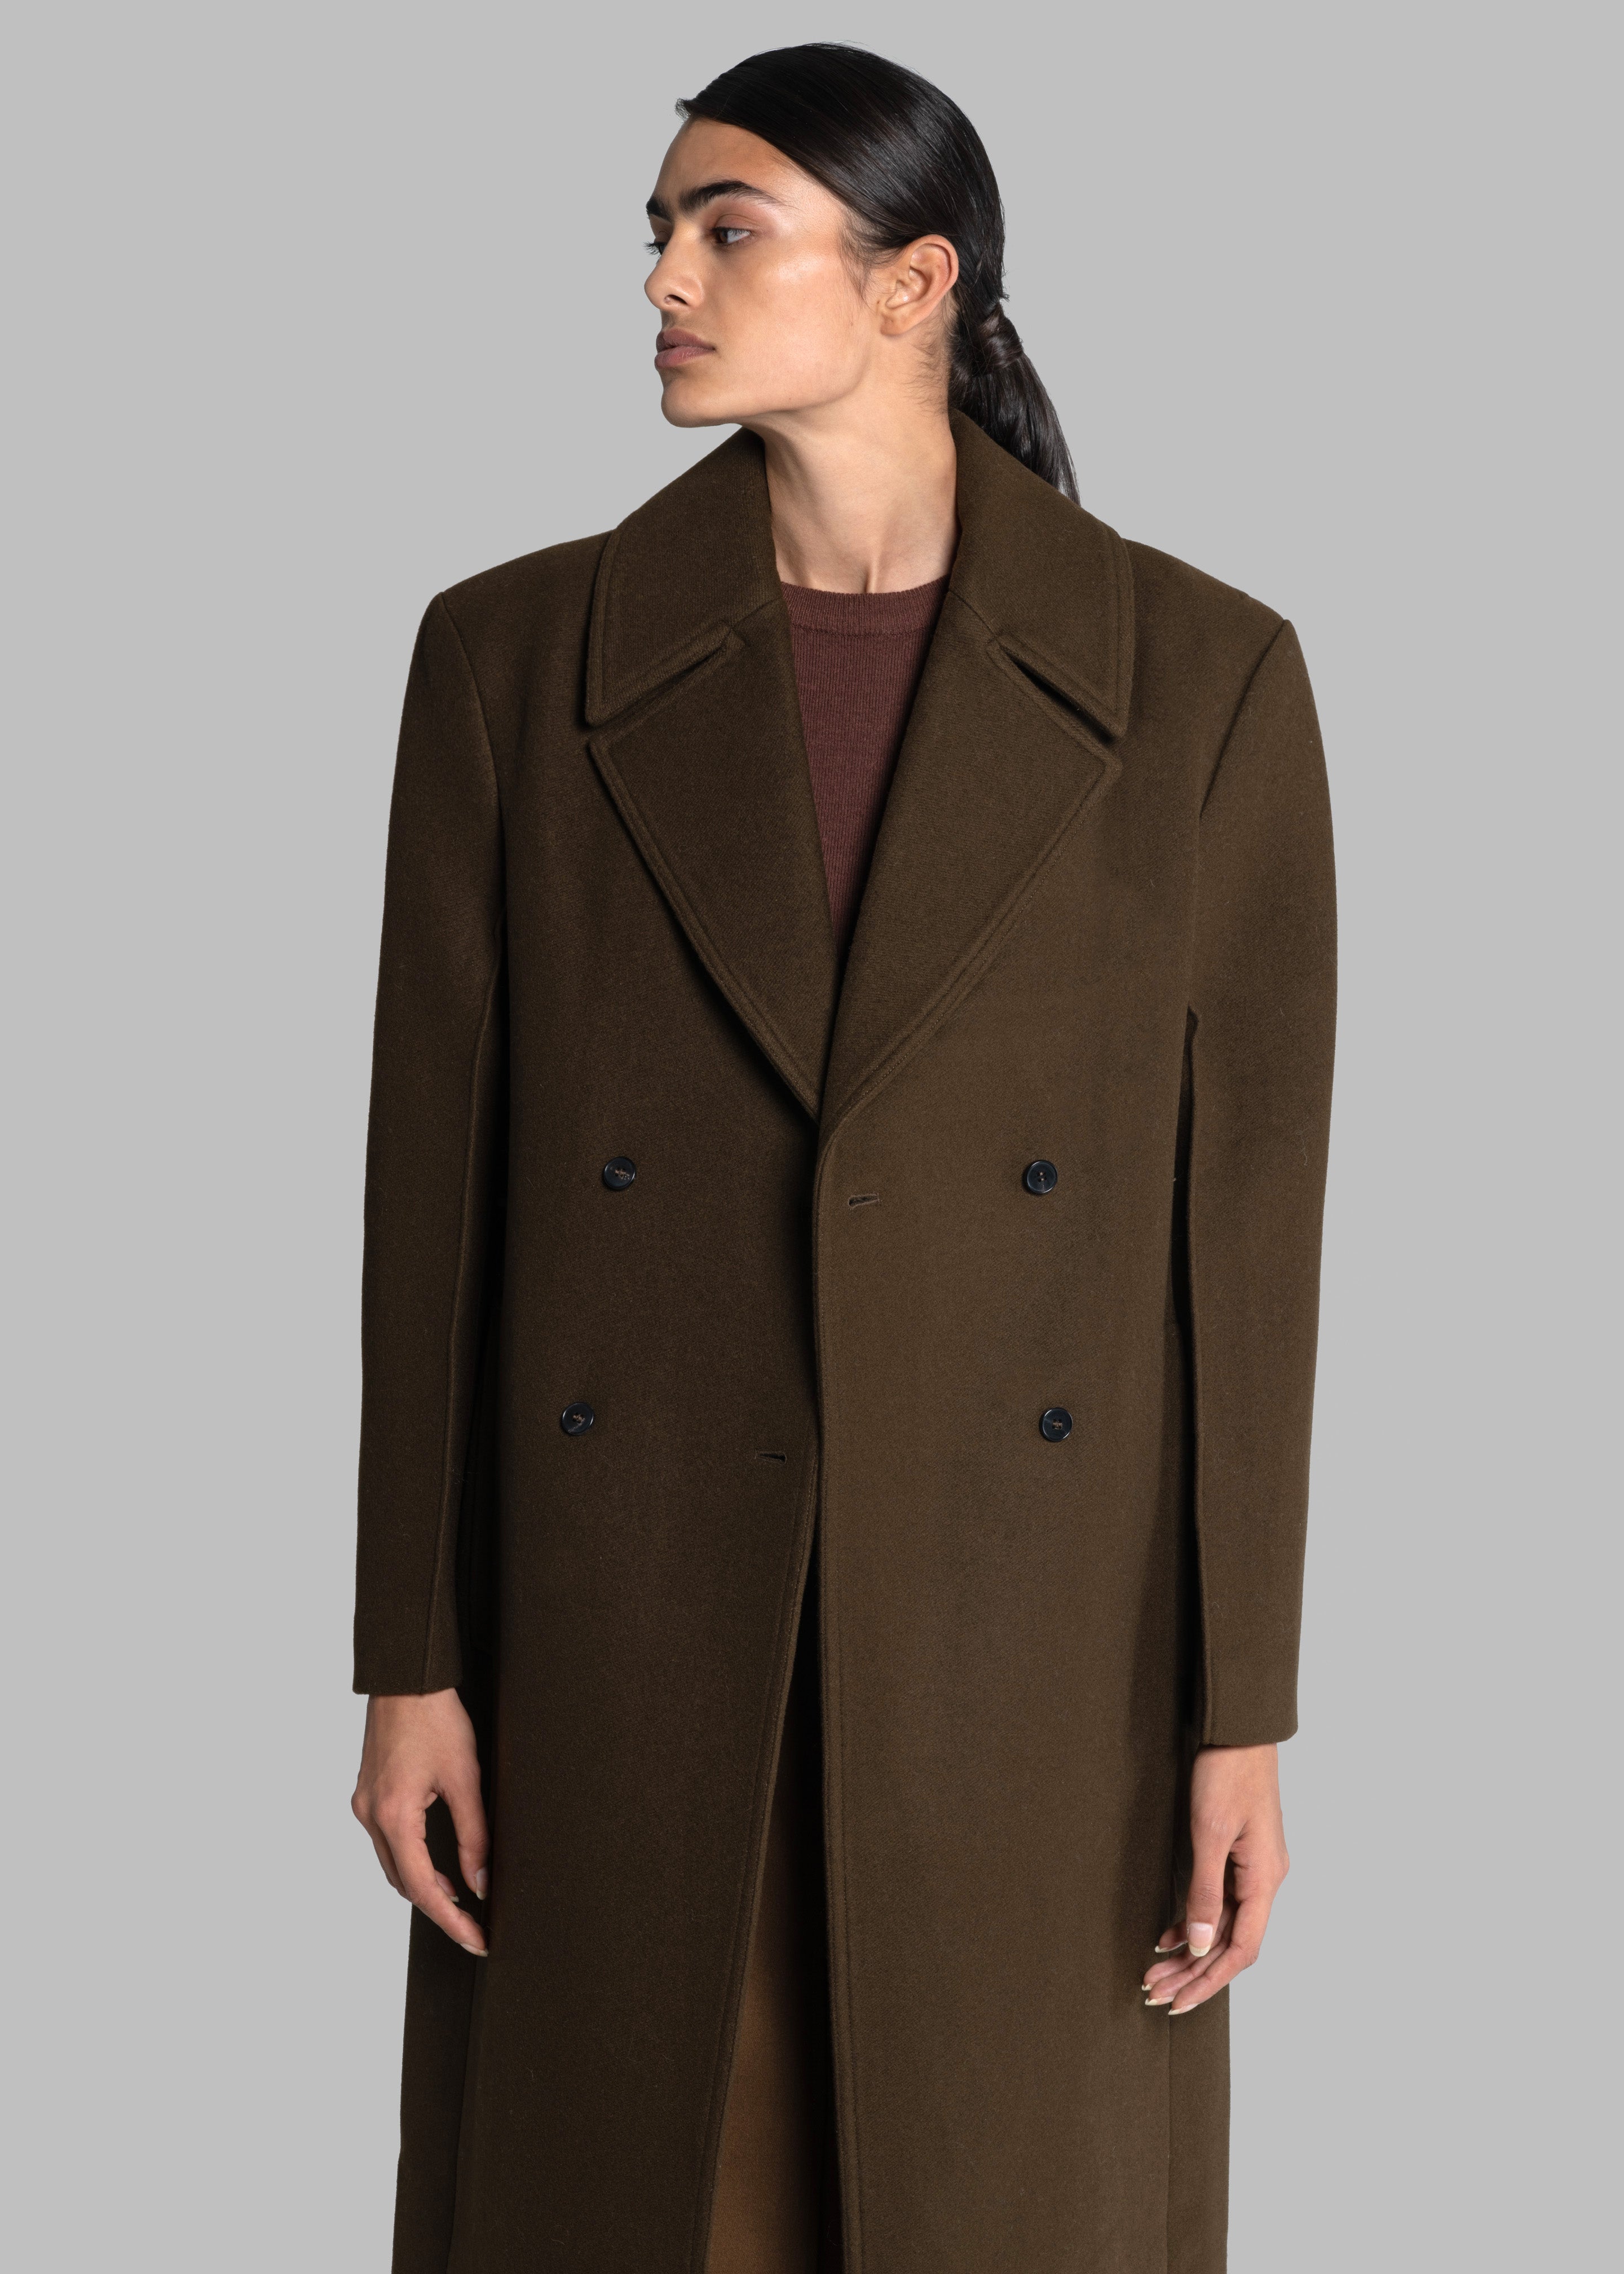 Karli Double Breasted Coat - Brown - 3